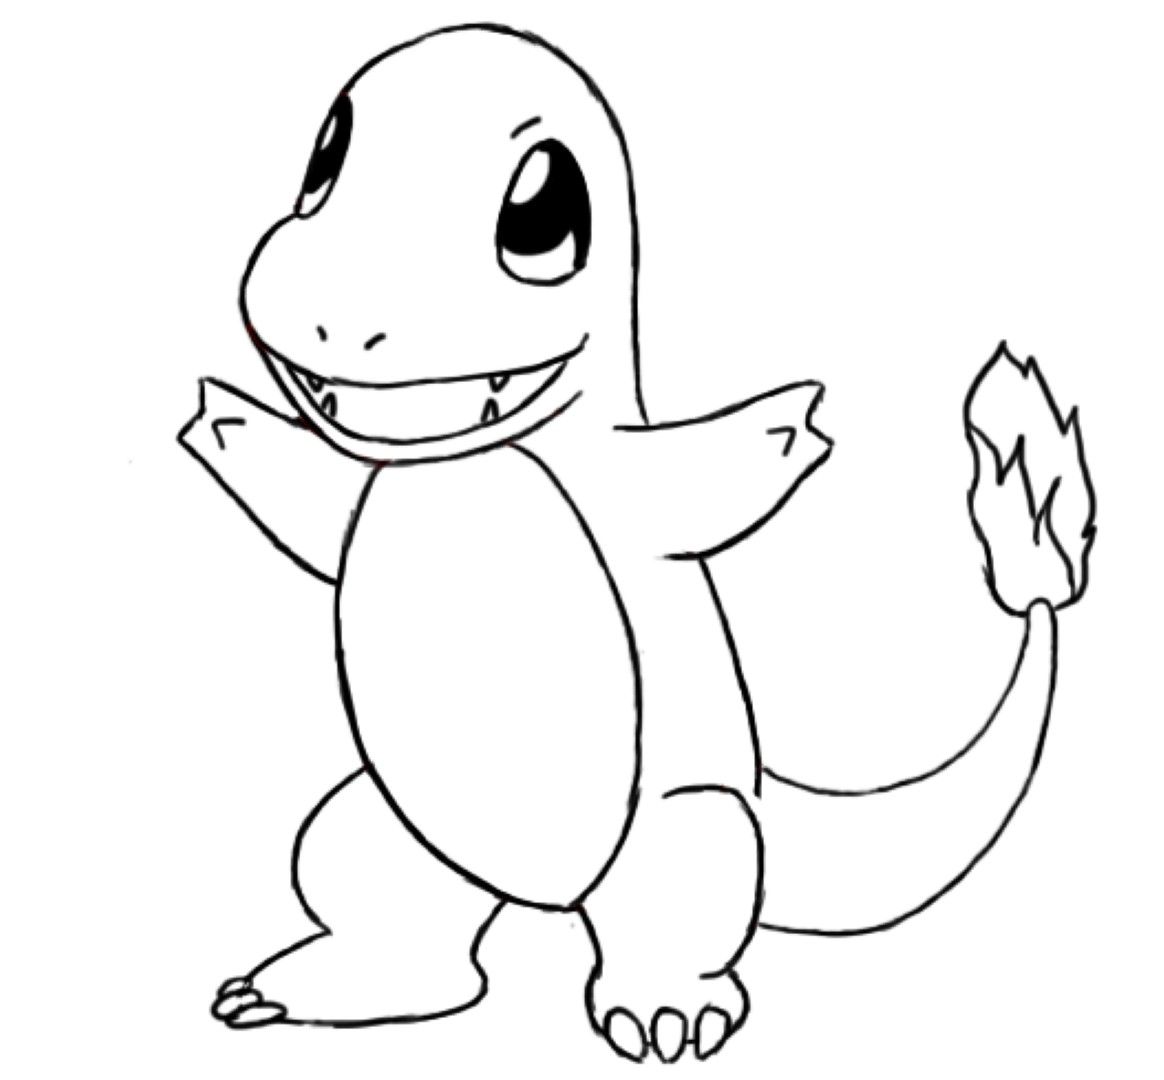 Pokemon Charmander Coloring Pages Coloring Home Get excellent printing results with 300 dpi resolution. pokemon charmander coloring pages